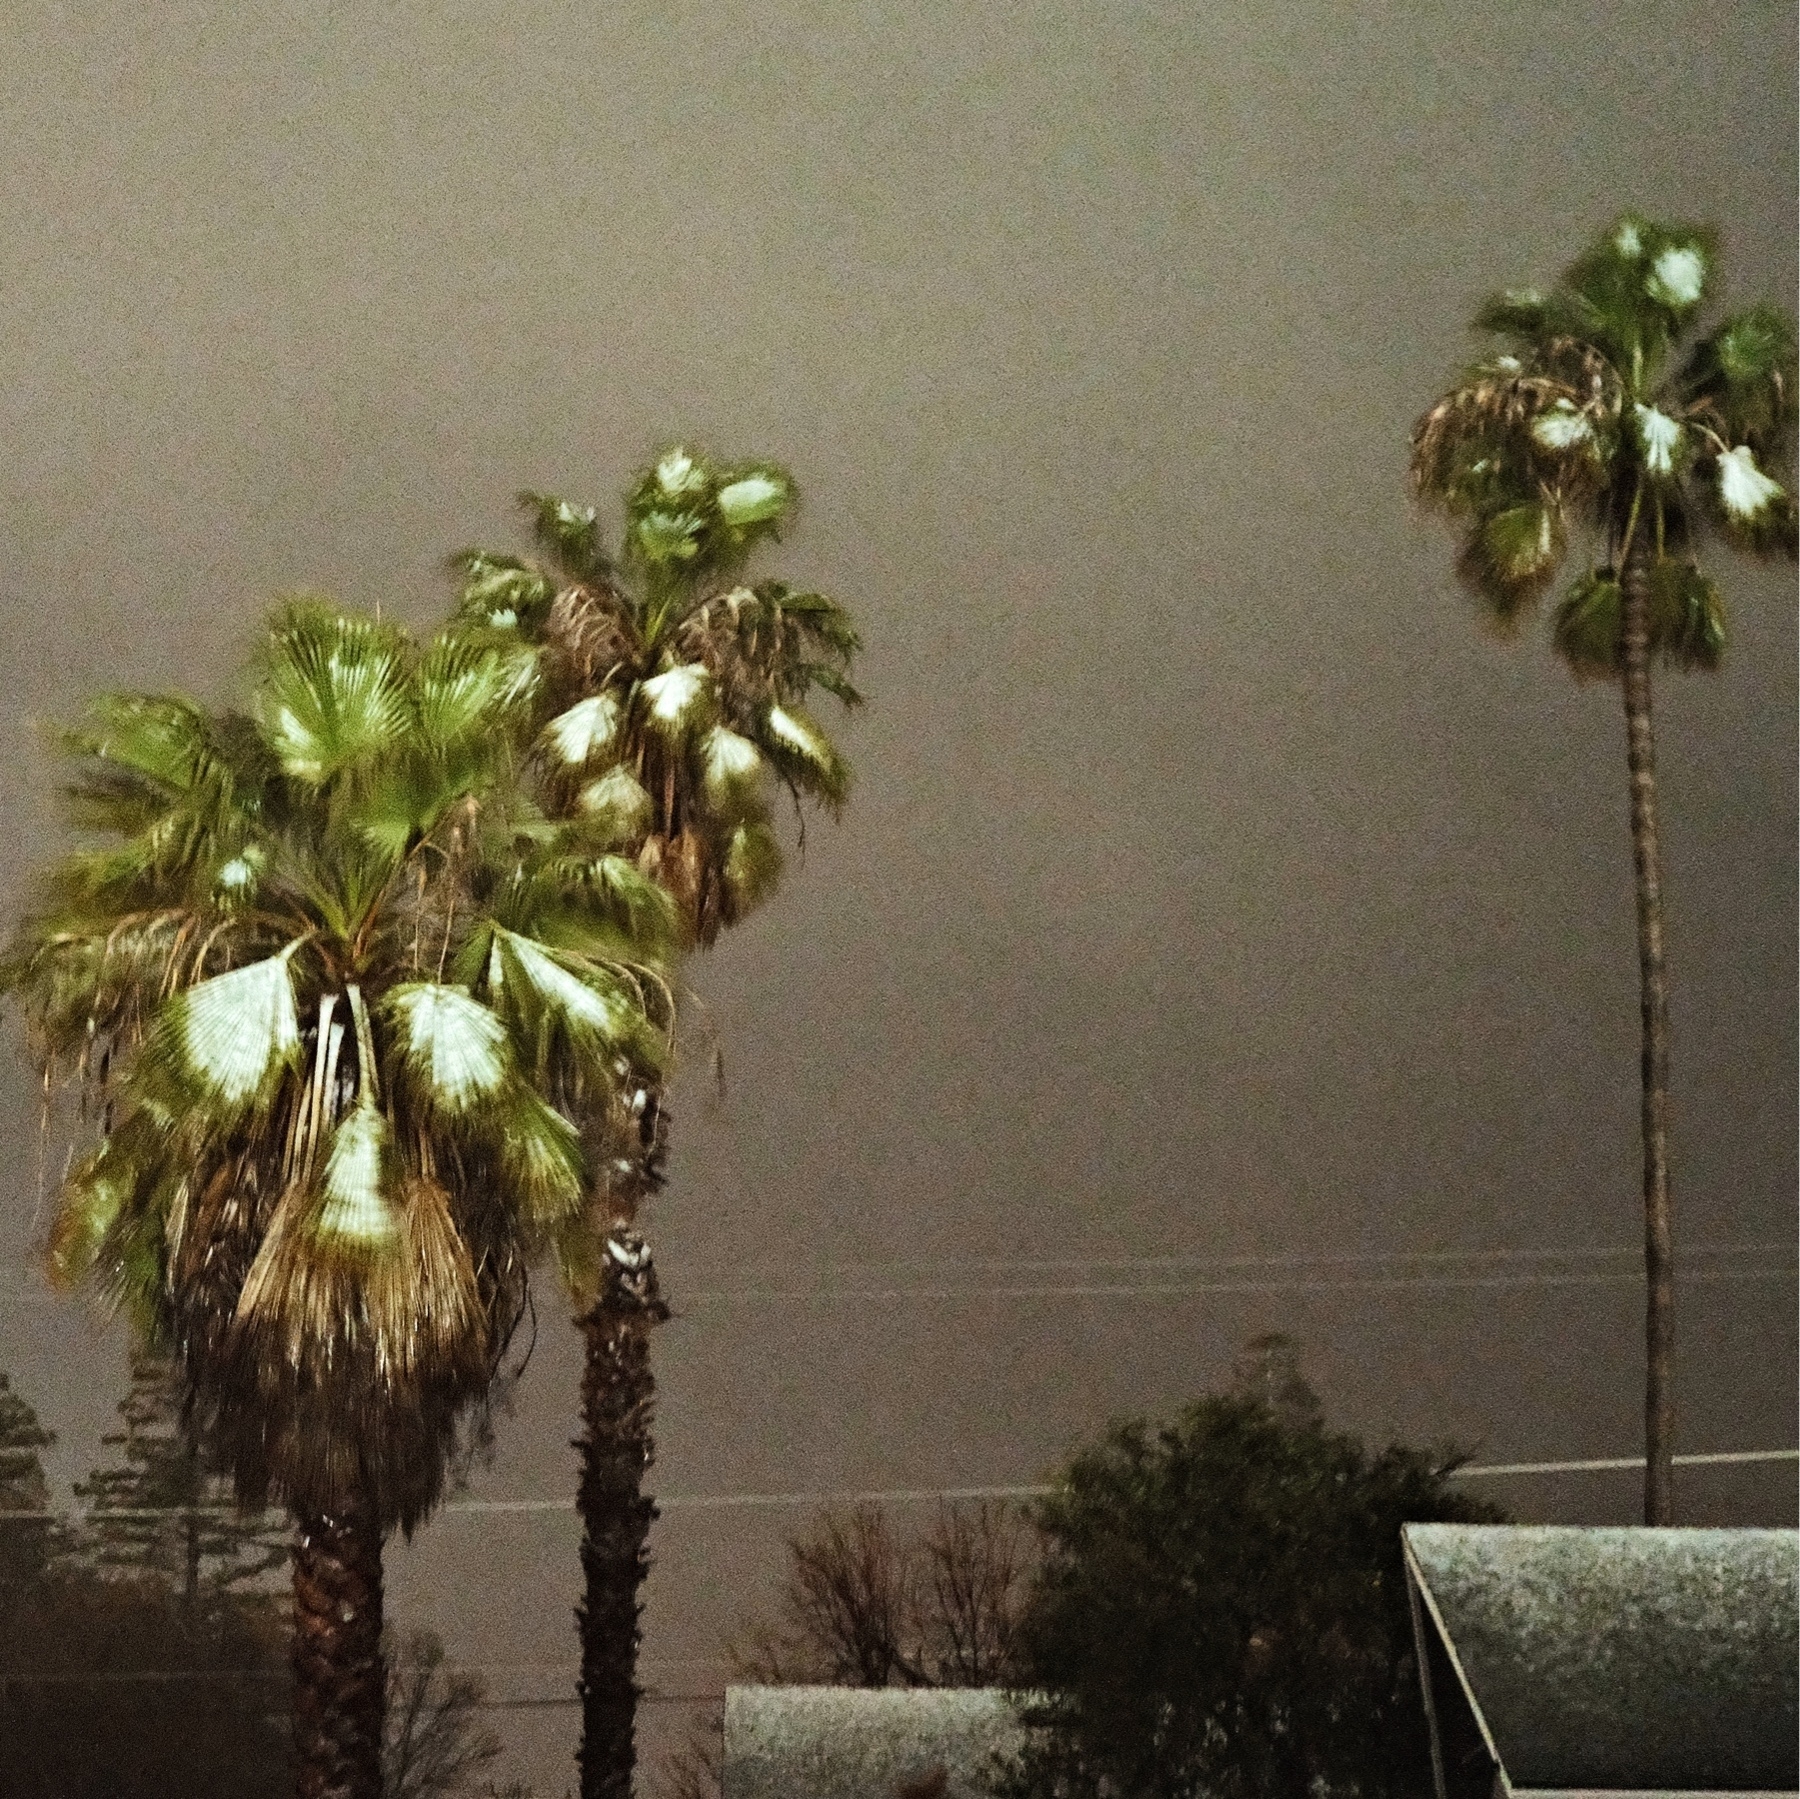 A classic photo of snow on palm tree leaves against the dark, cloudy background.